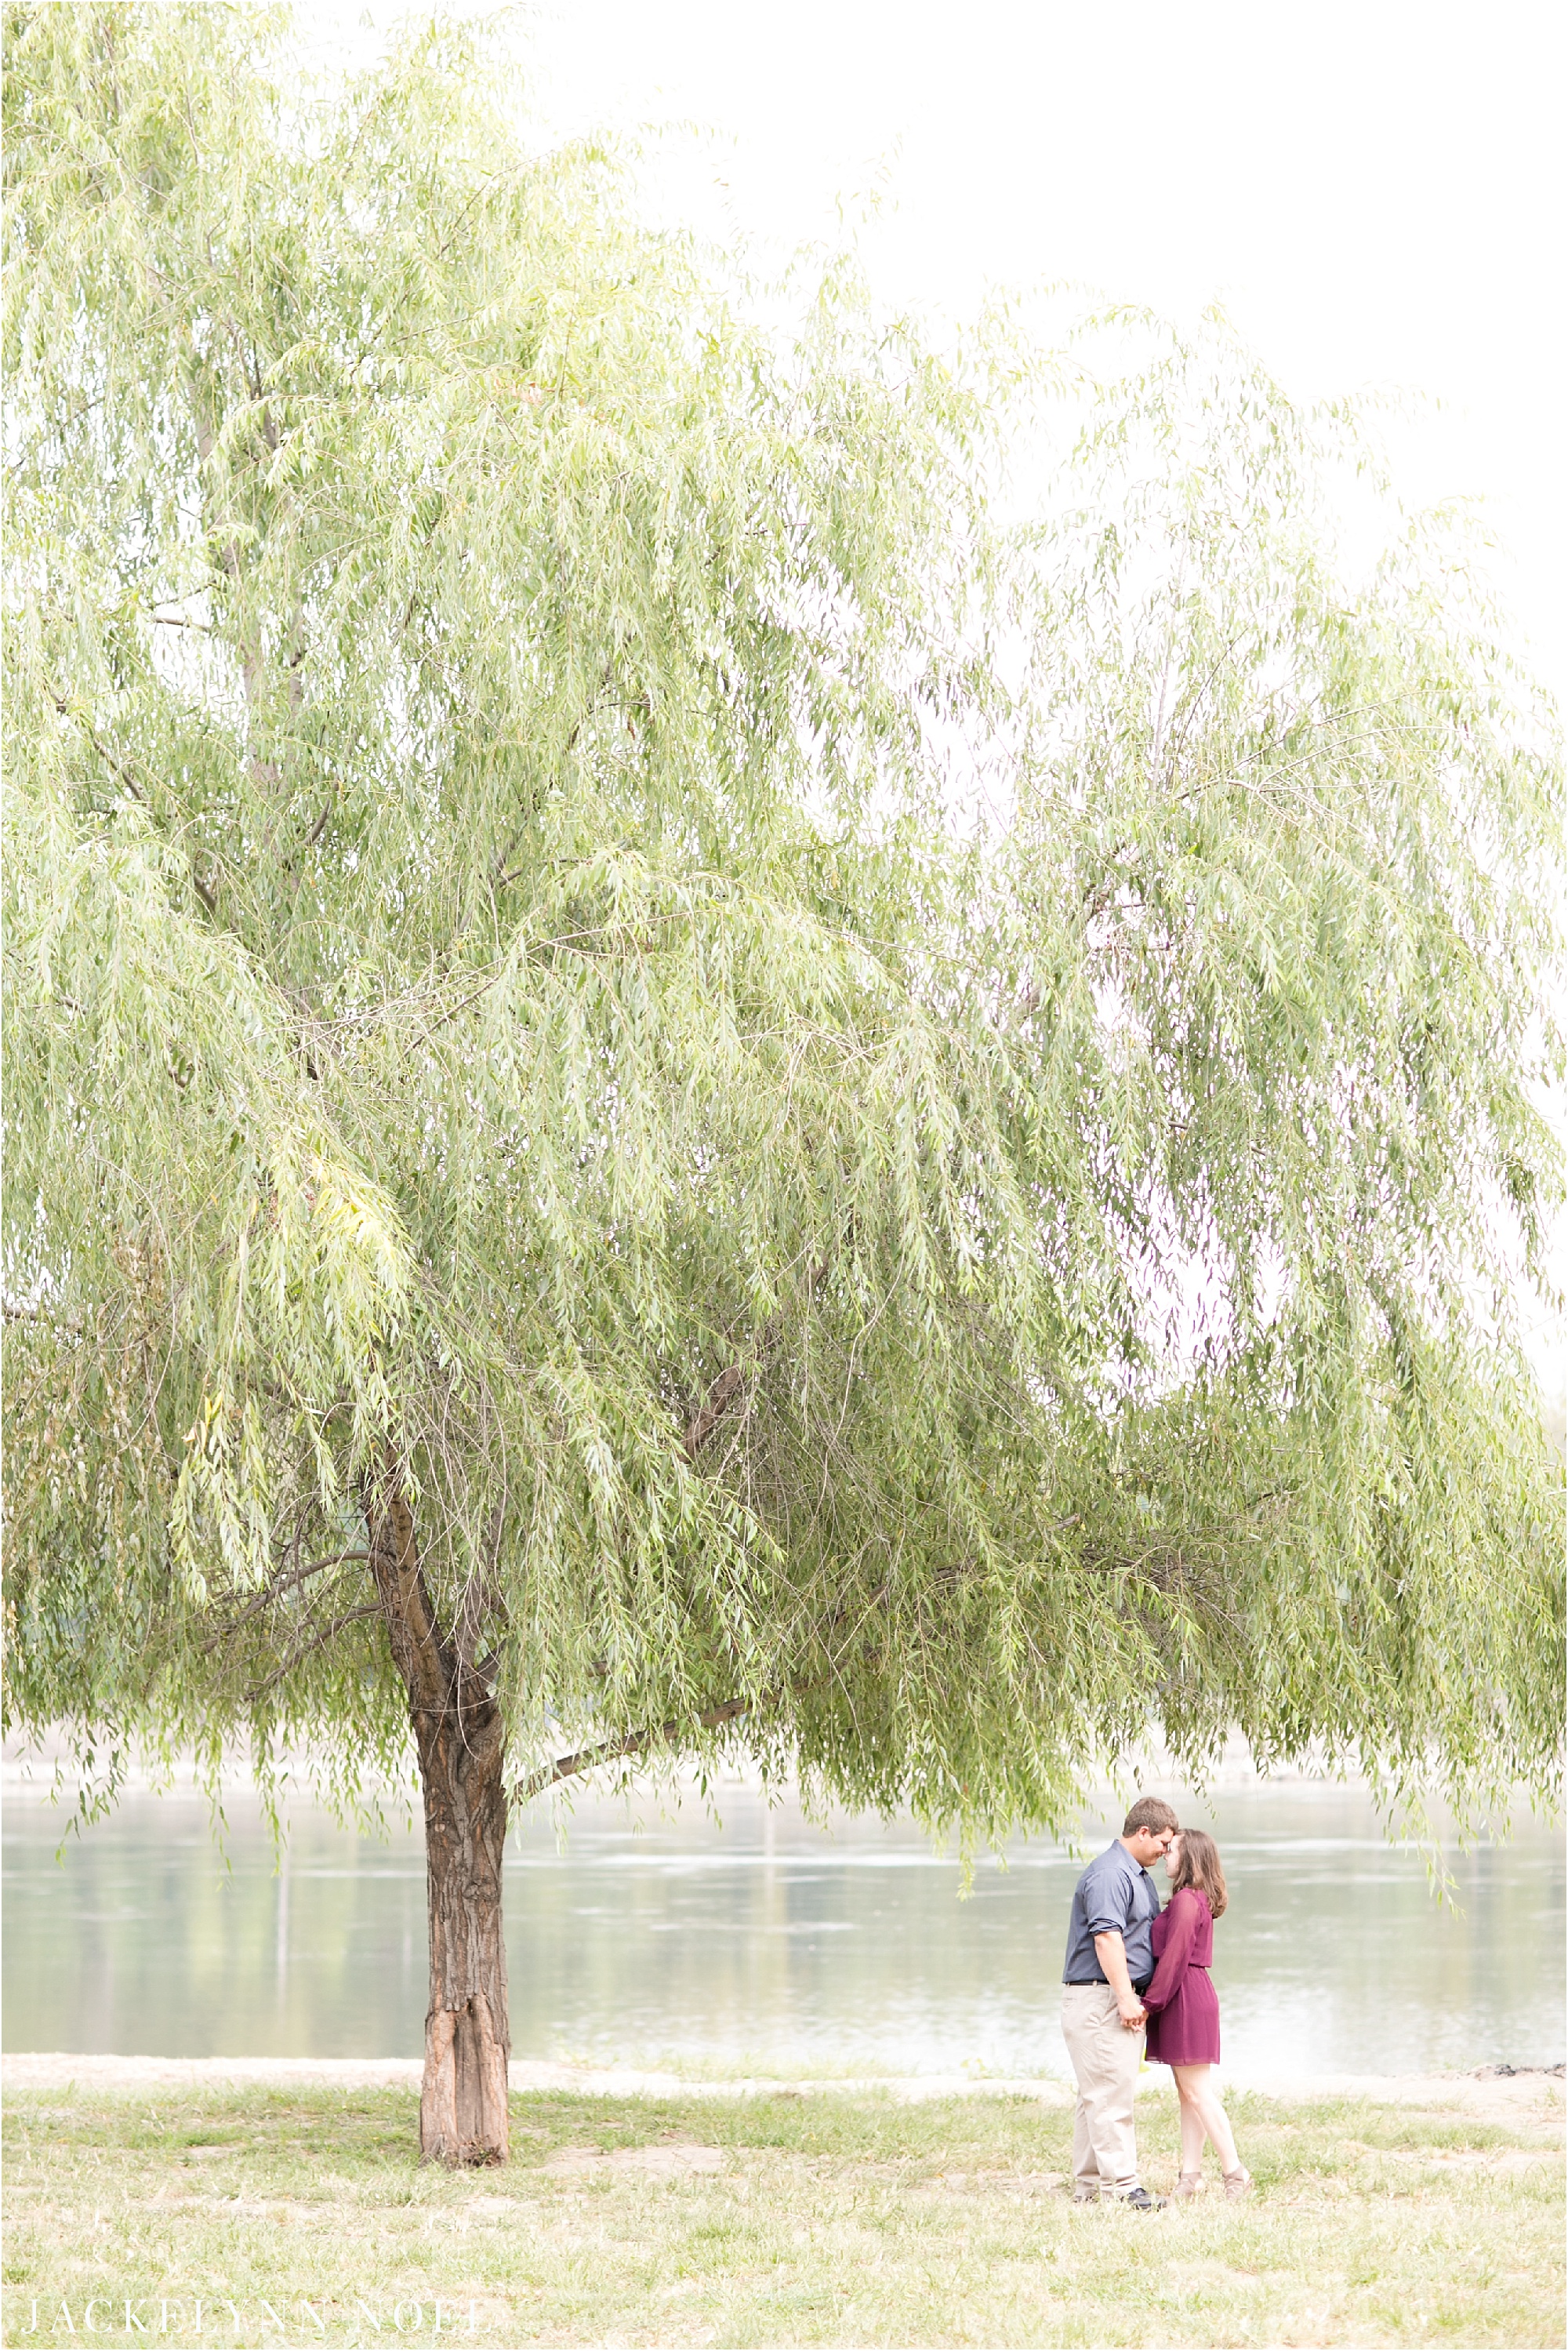 Joey and Jack Engaged in St. Charles by Jackelynn Noel Photography